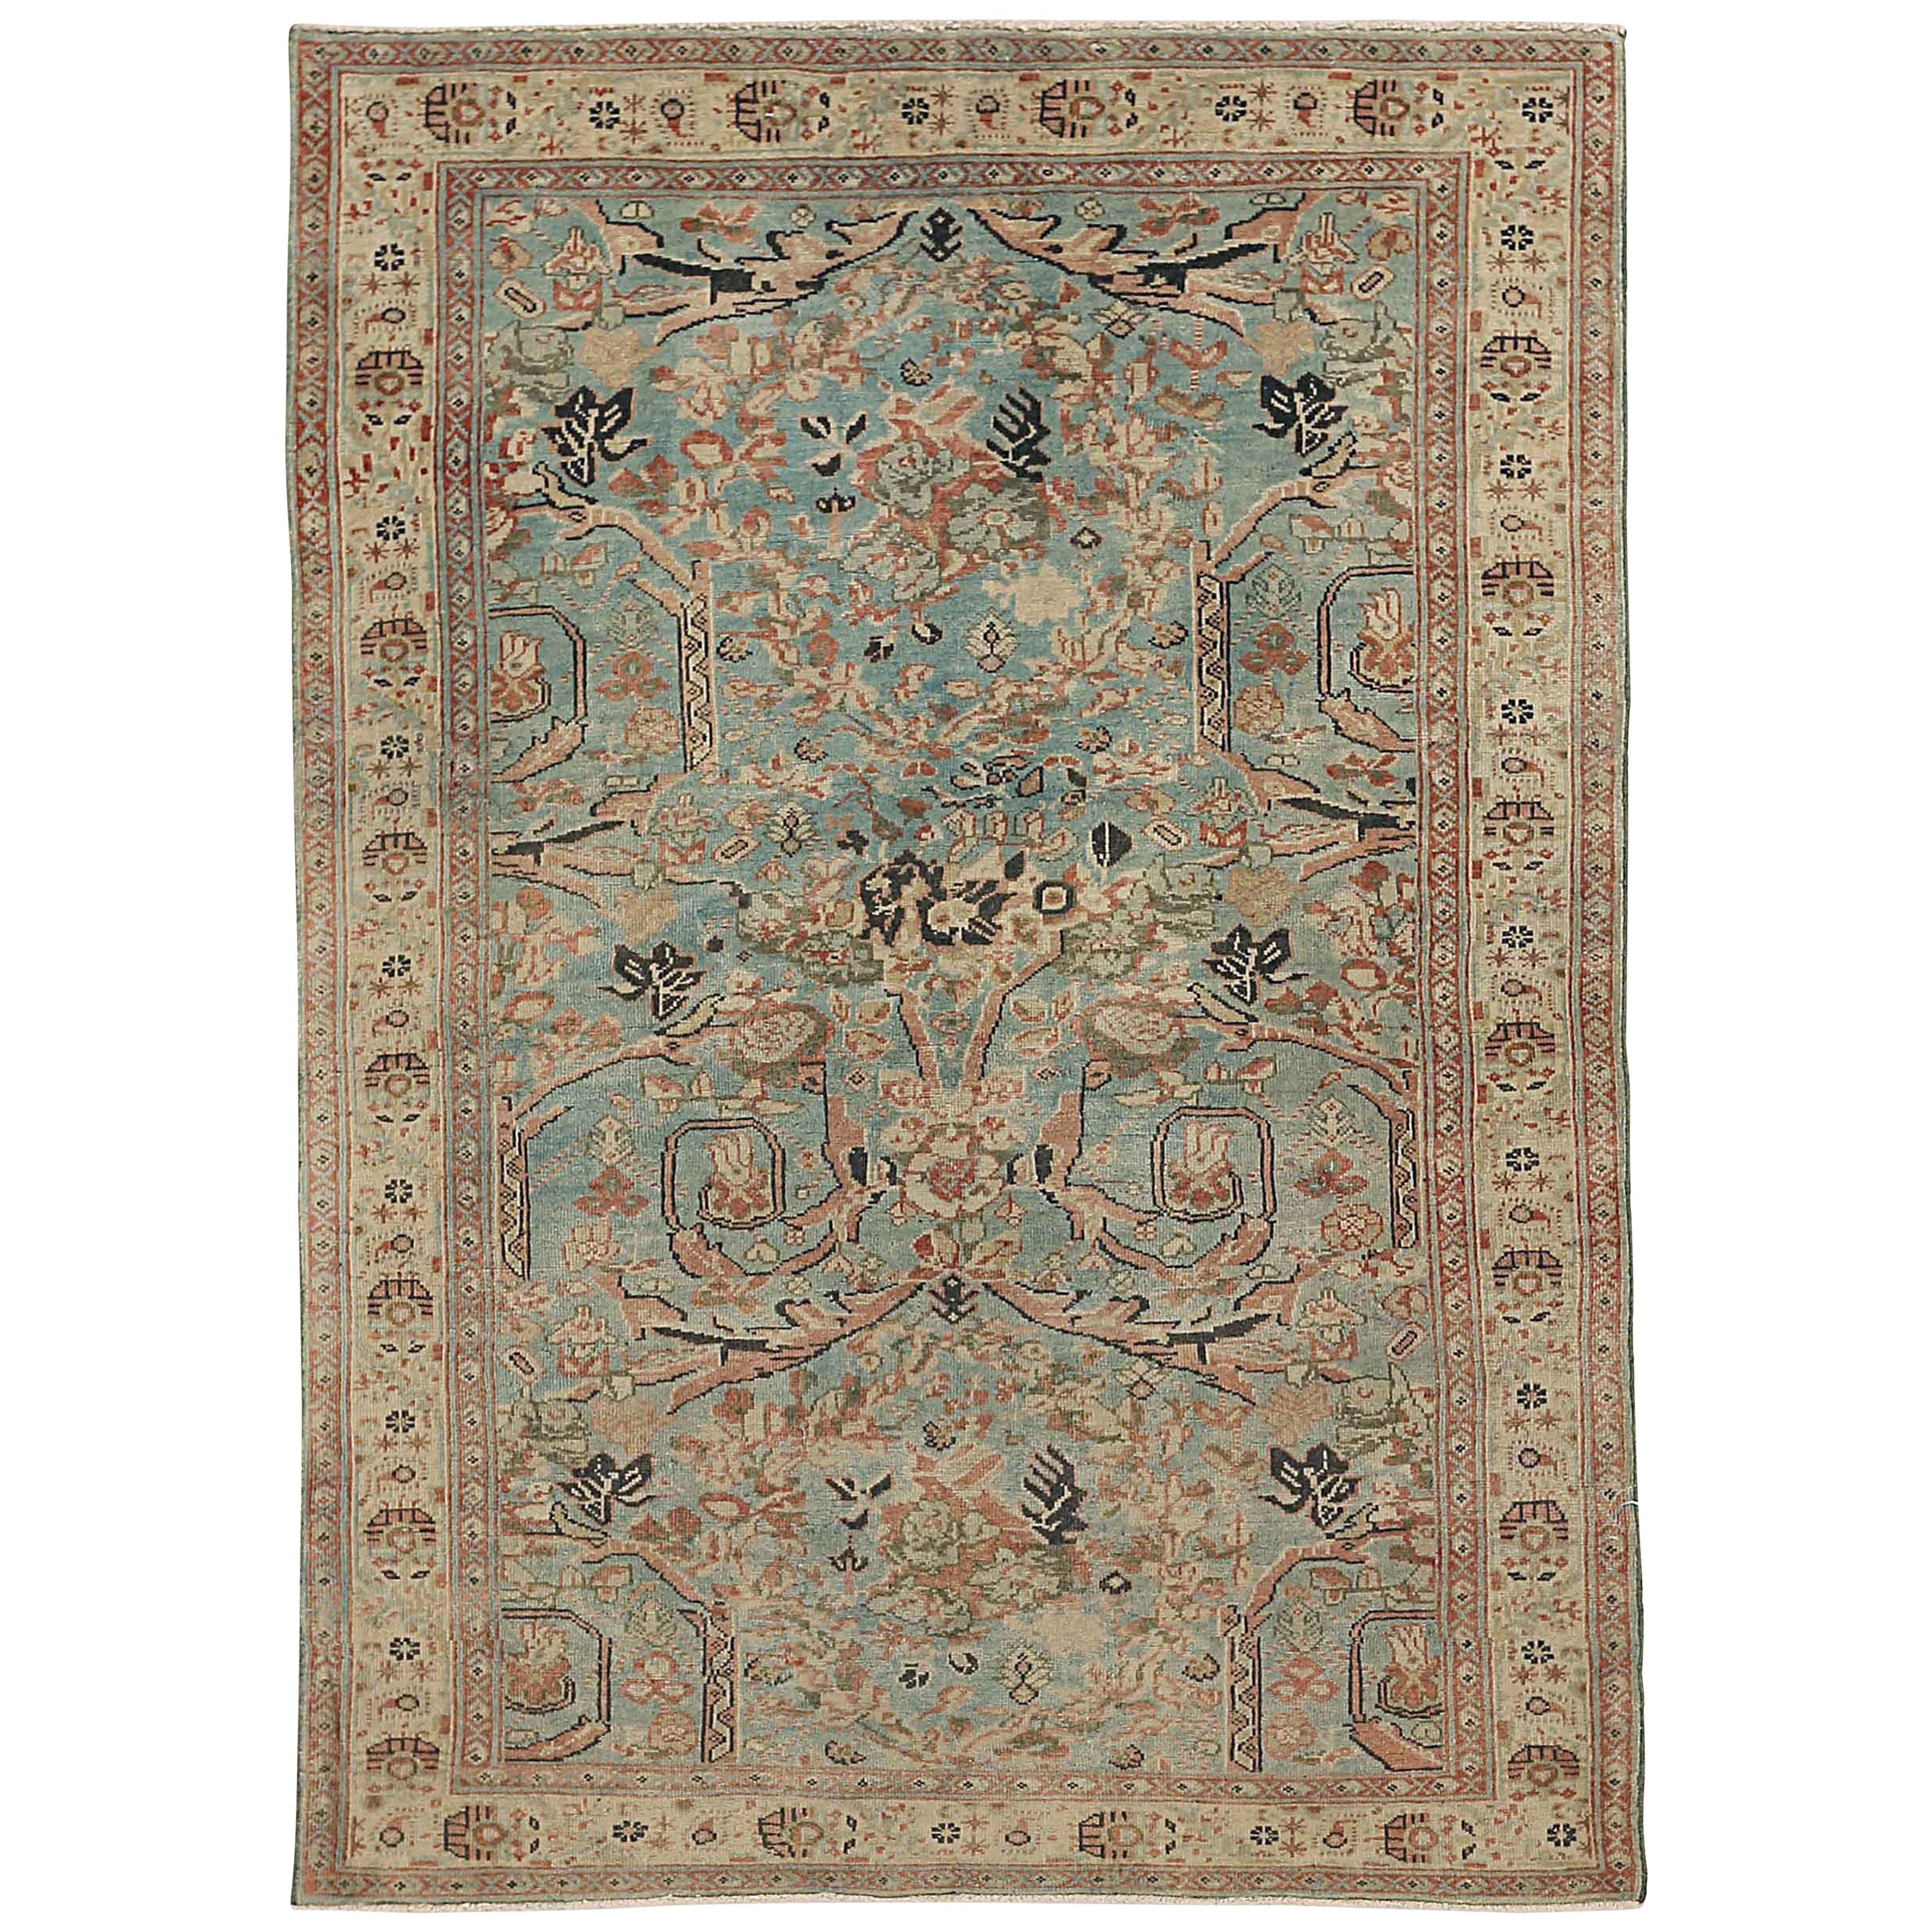 Area Antique Persian Sultanabad Rug with Floral Details on Brown & Blue Field